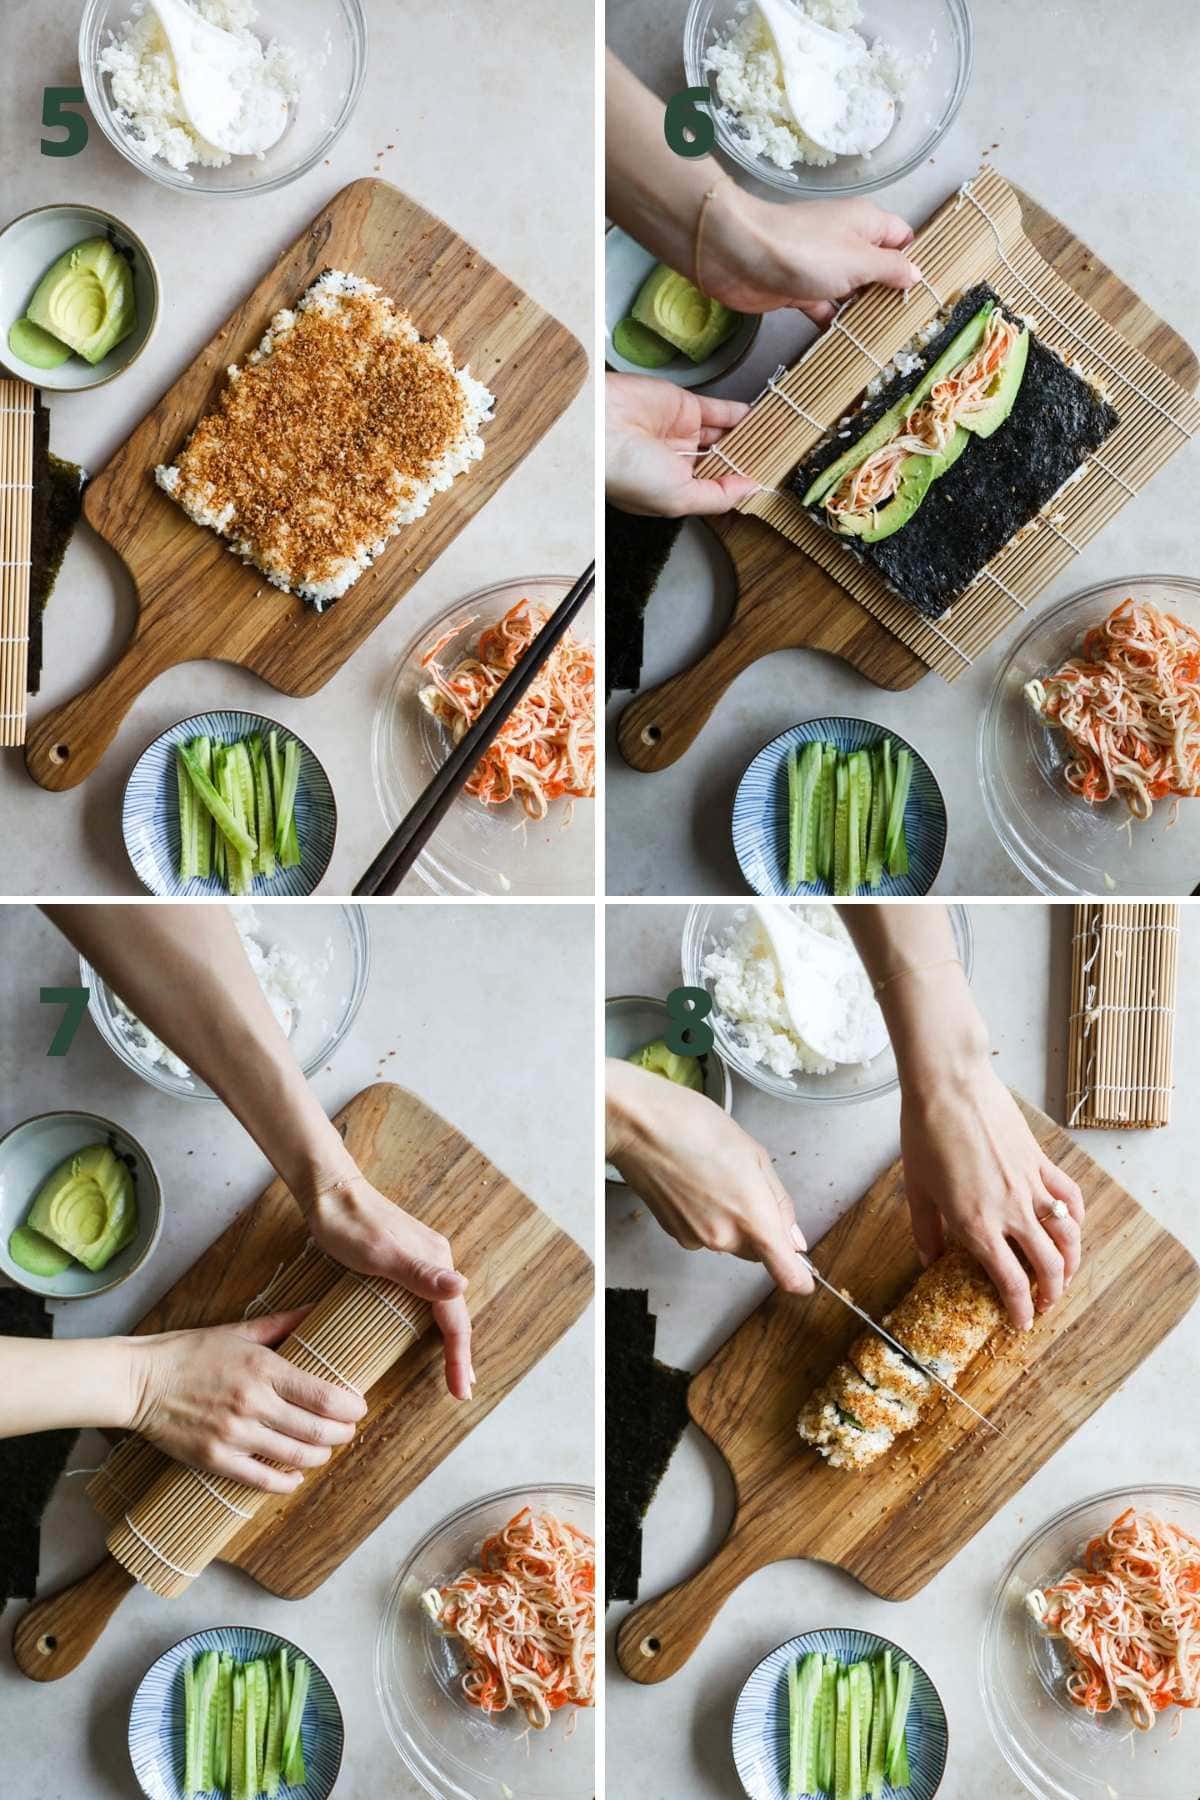 Steps to make spicy crunchy California sushi roll, including adding toasting panko, rolling ingredients, forming sushi roll with bamboo mat, and slicing the roll with a knife.